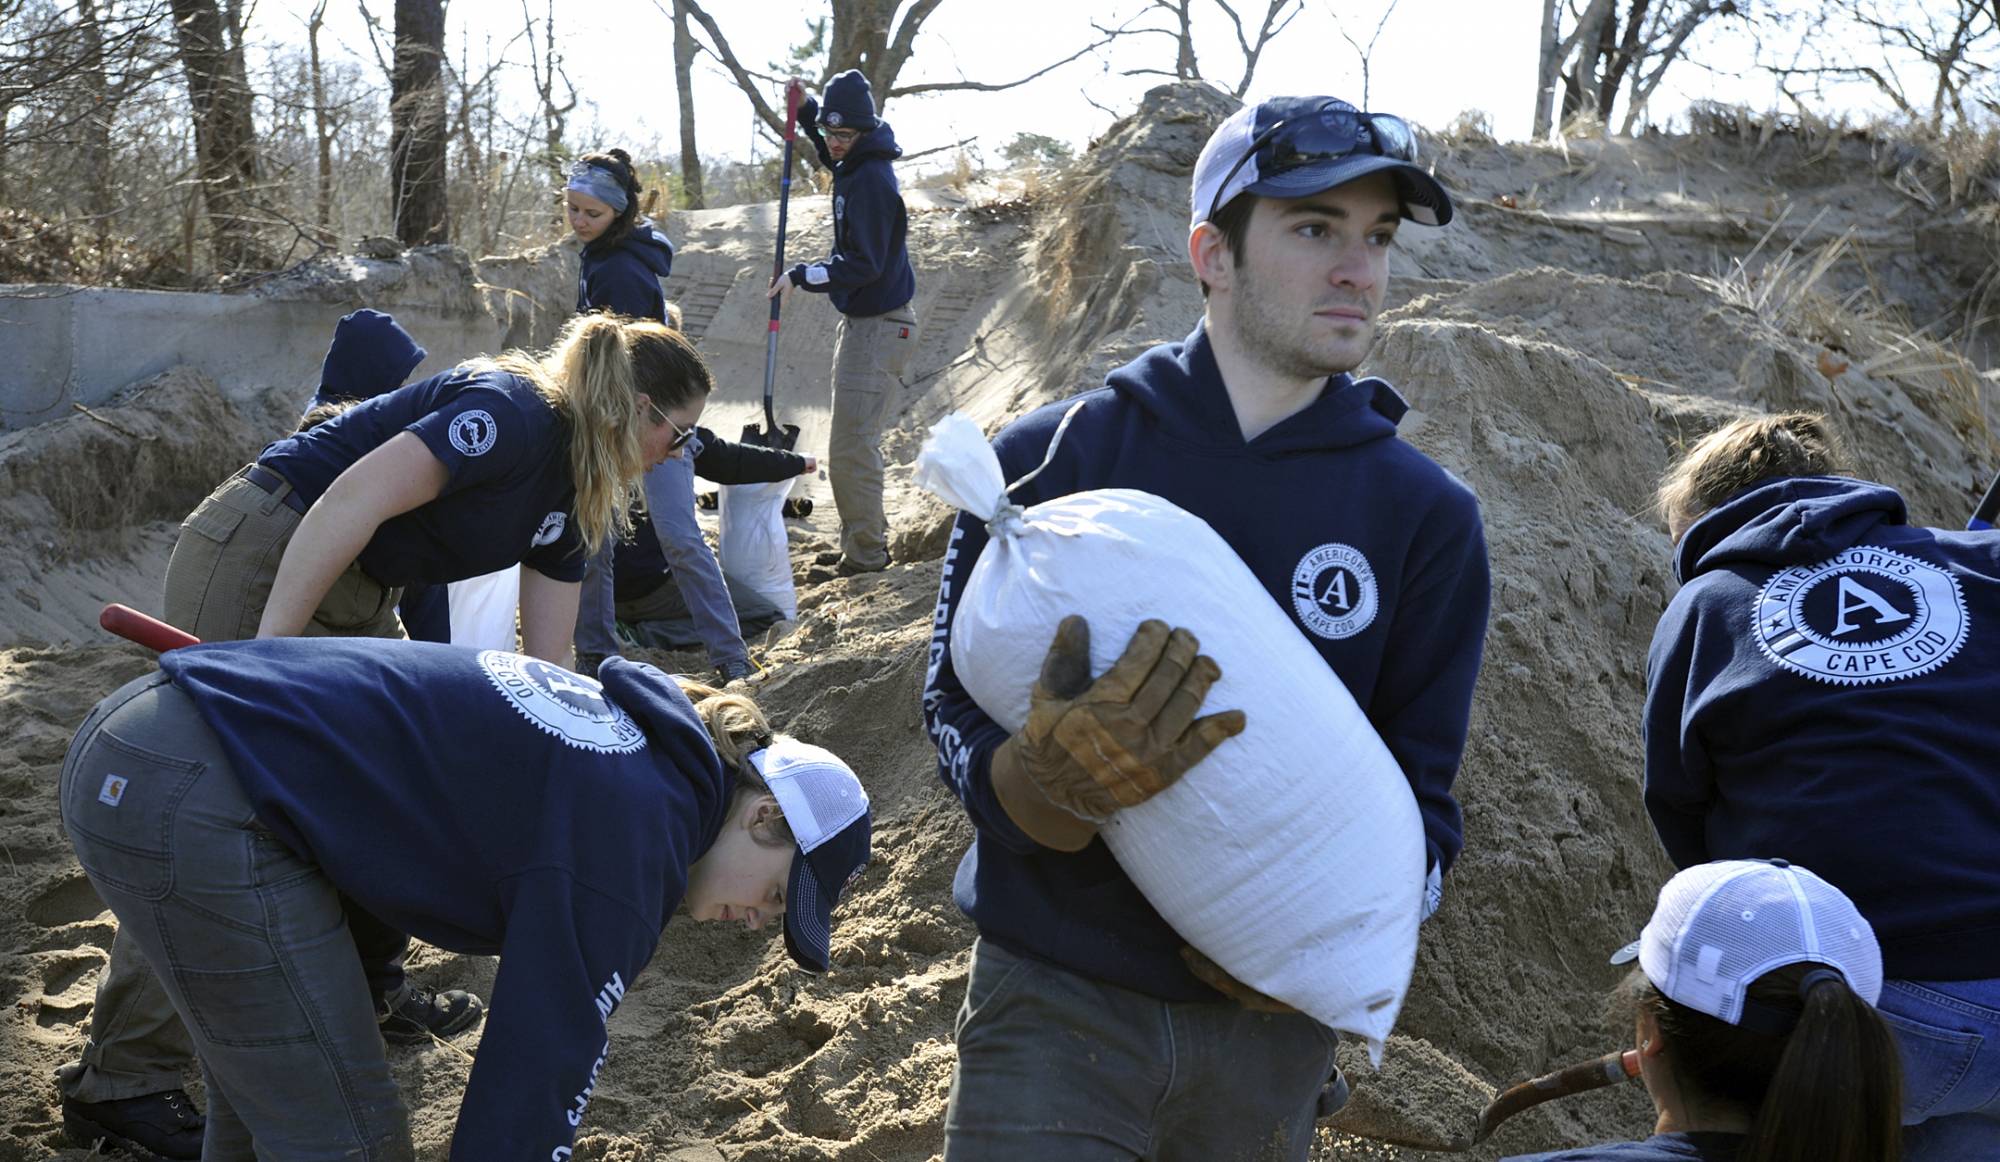 AmeriCorps worker Conor Terry lugs sandbags to a storage area at the town's DPW facility as preparations are underway for the approaching storm, Thursday, March 1, 2018 in Provincetown, Mass. (Steve Heaslip/The Cape Cod Times via AP)